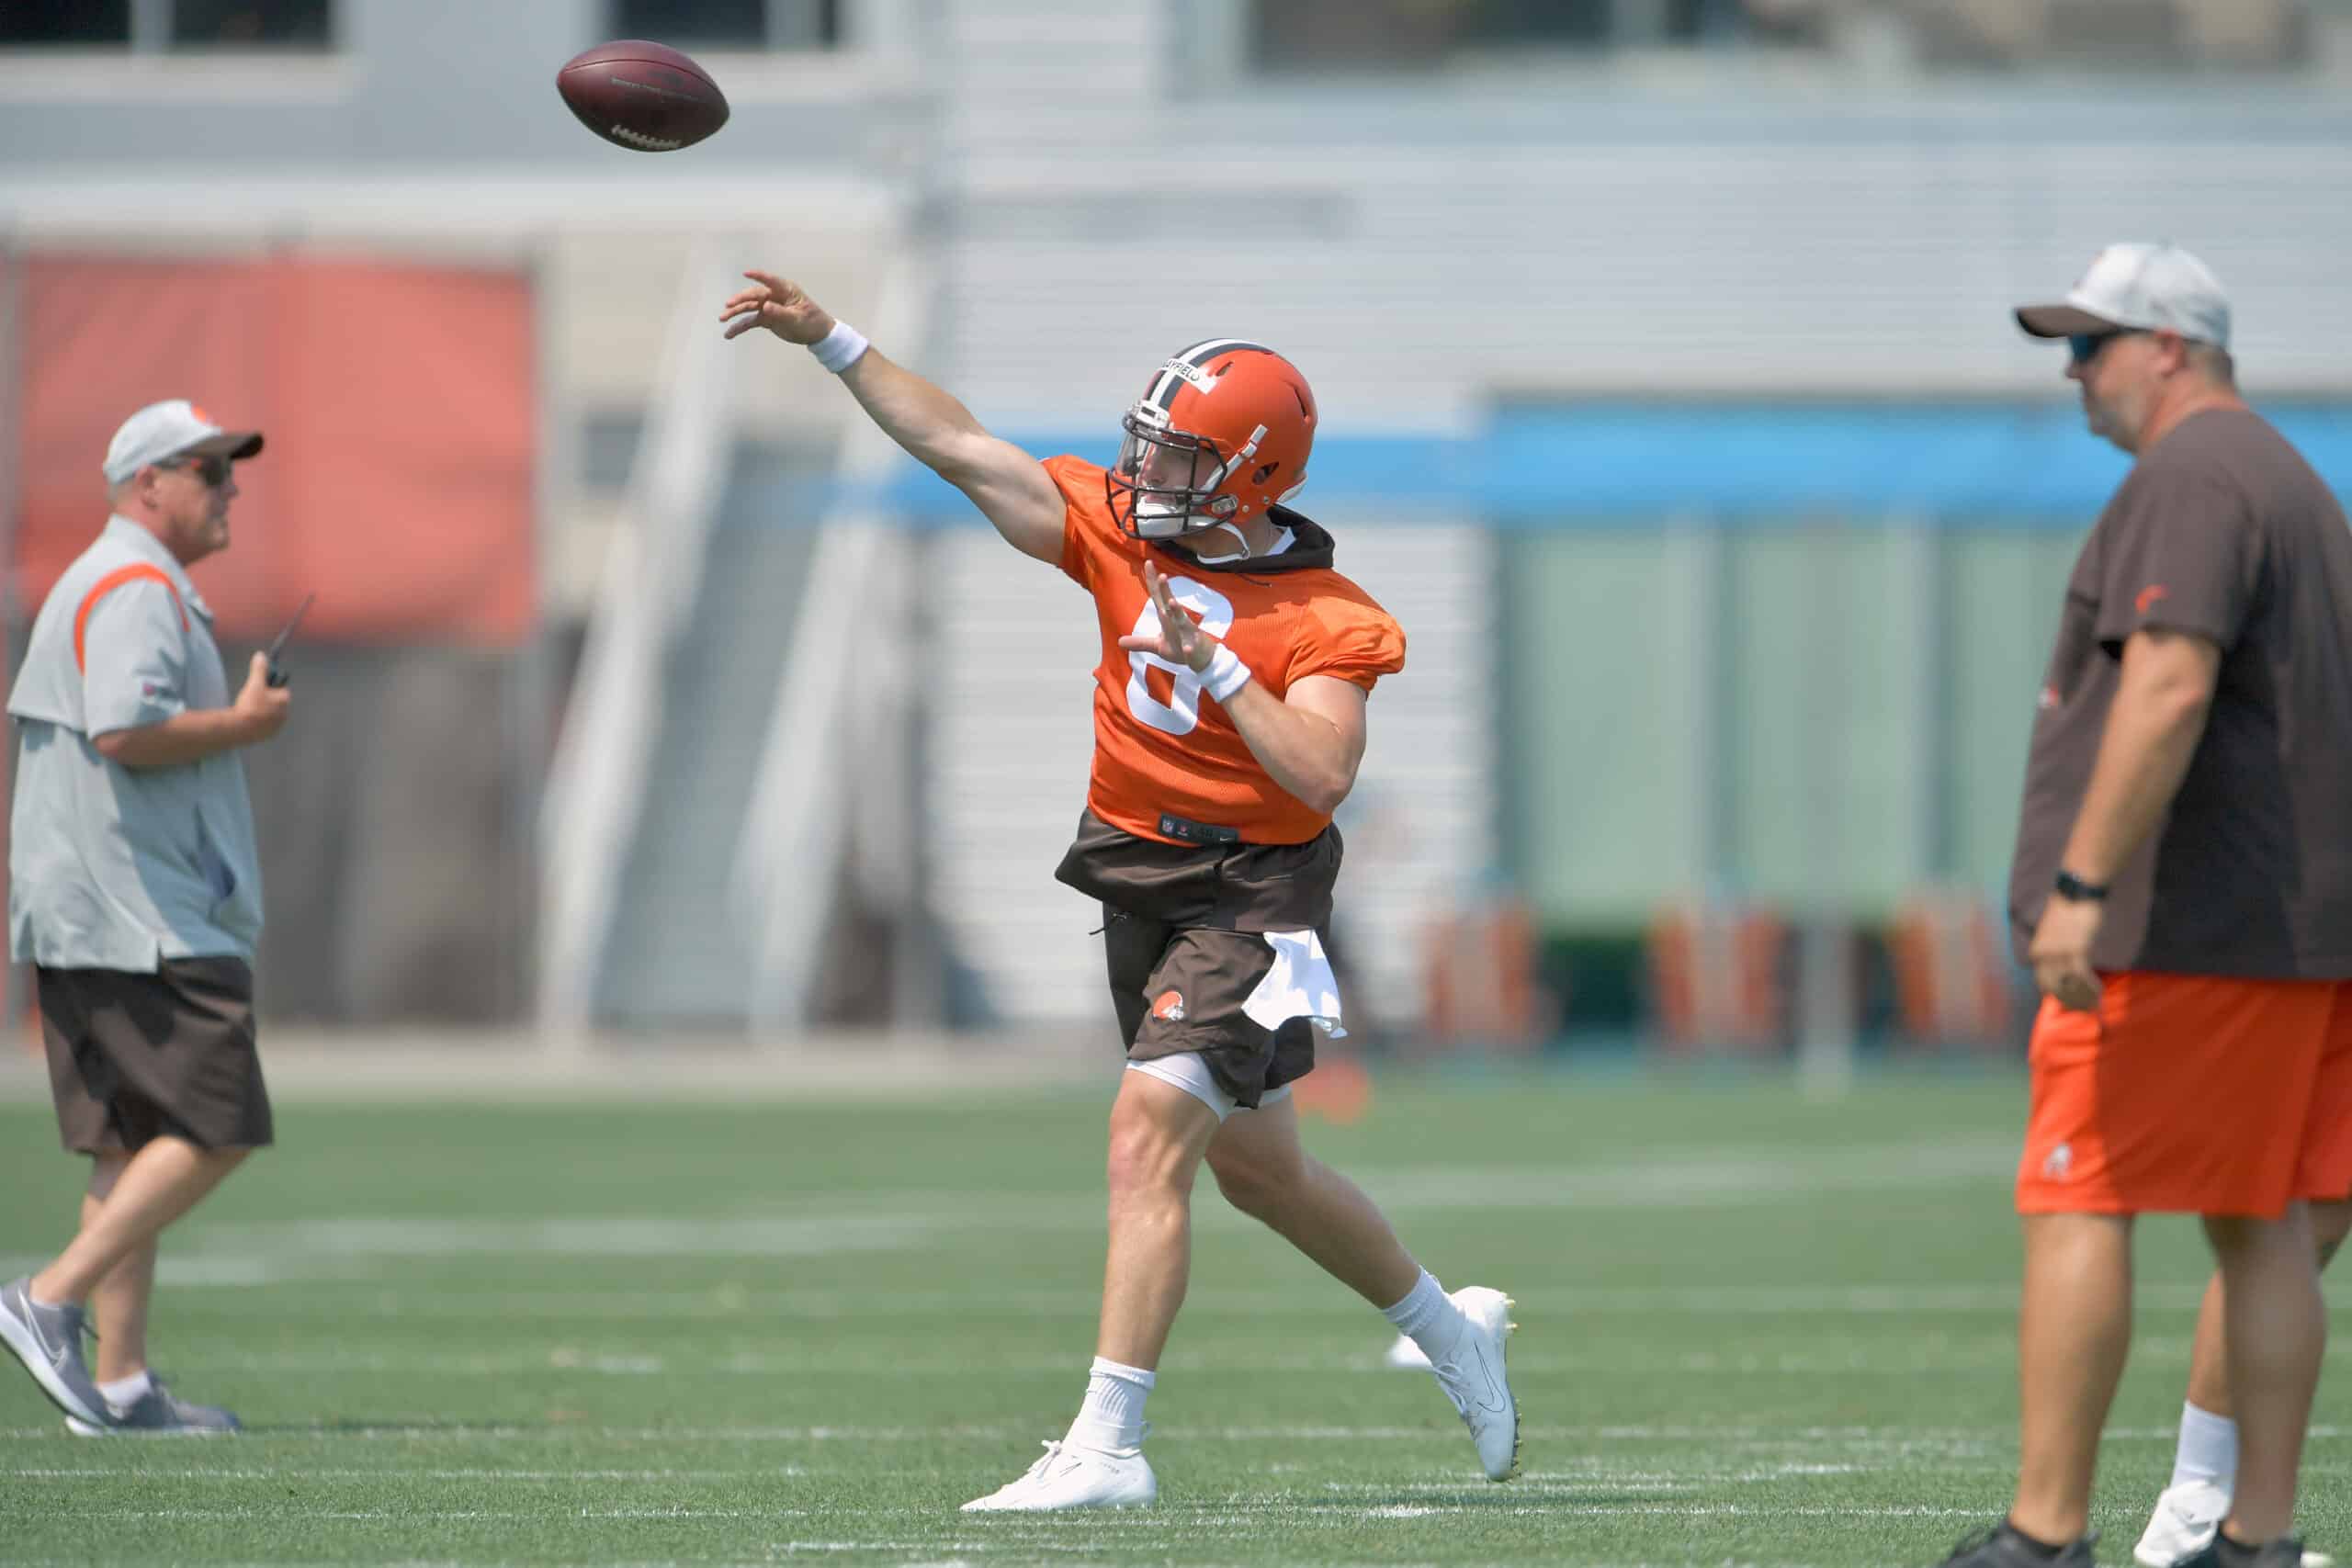 Quarterback Baker Mayfield #6 of the Cleveland Browns runs a drill during the first day of Cleveland Browns Training Camp on July 28, 2021 in Berea, Ohio.